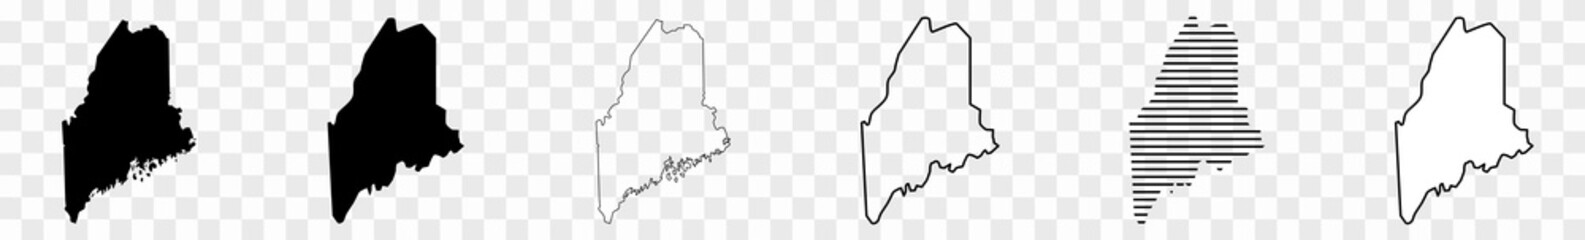 Maine Map Black | State Border | United States | US America | Transparent Isolated | Variations